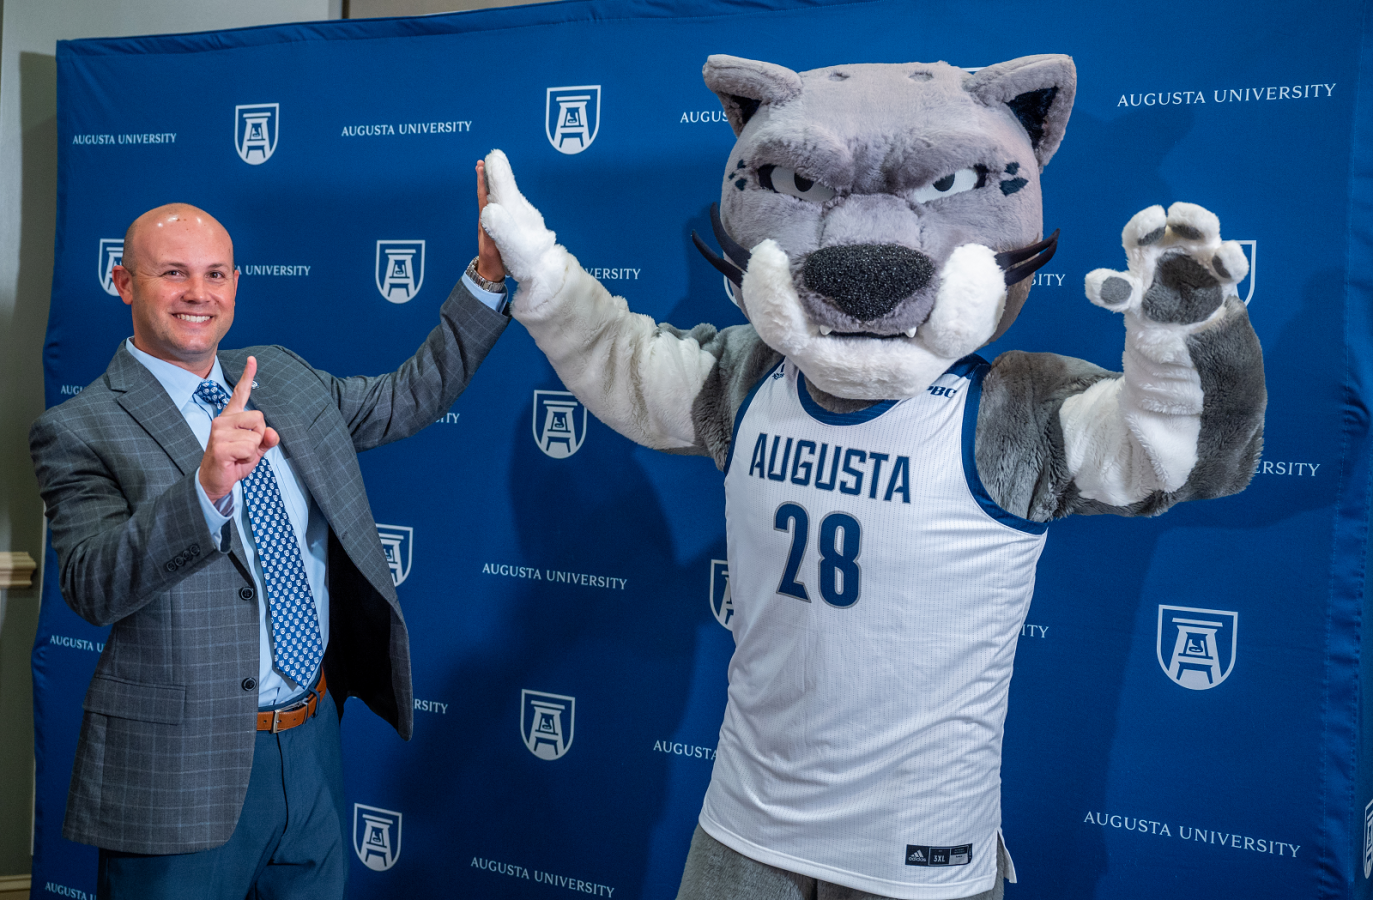 A bold vision for success: Augusta University's new athletics director has big plans for Jaguars